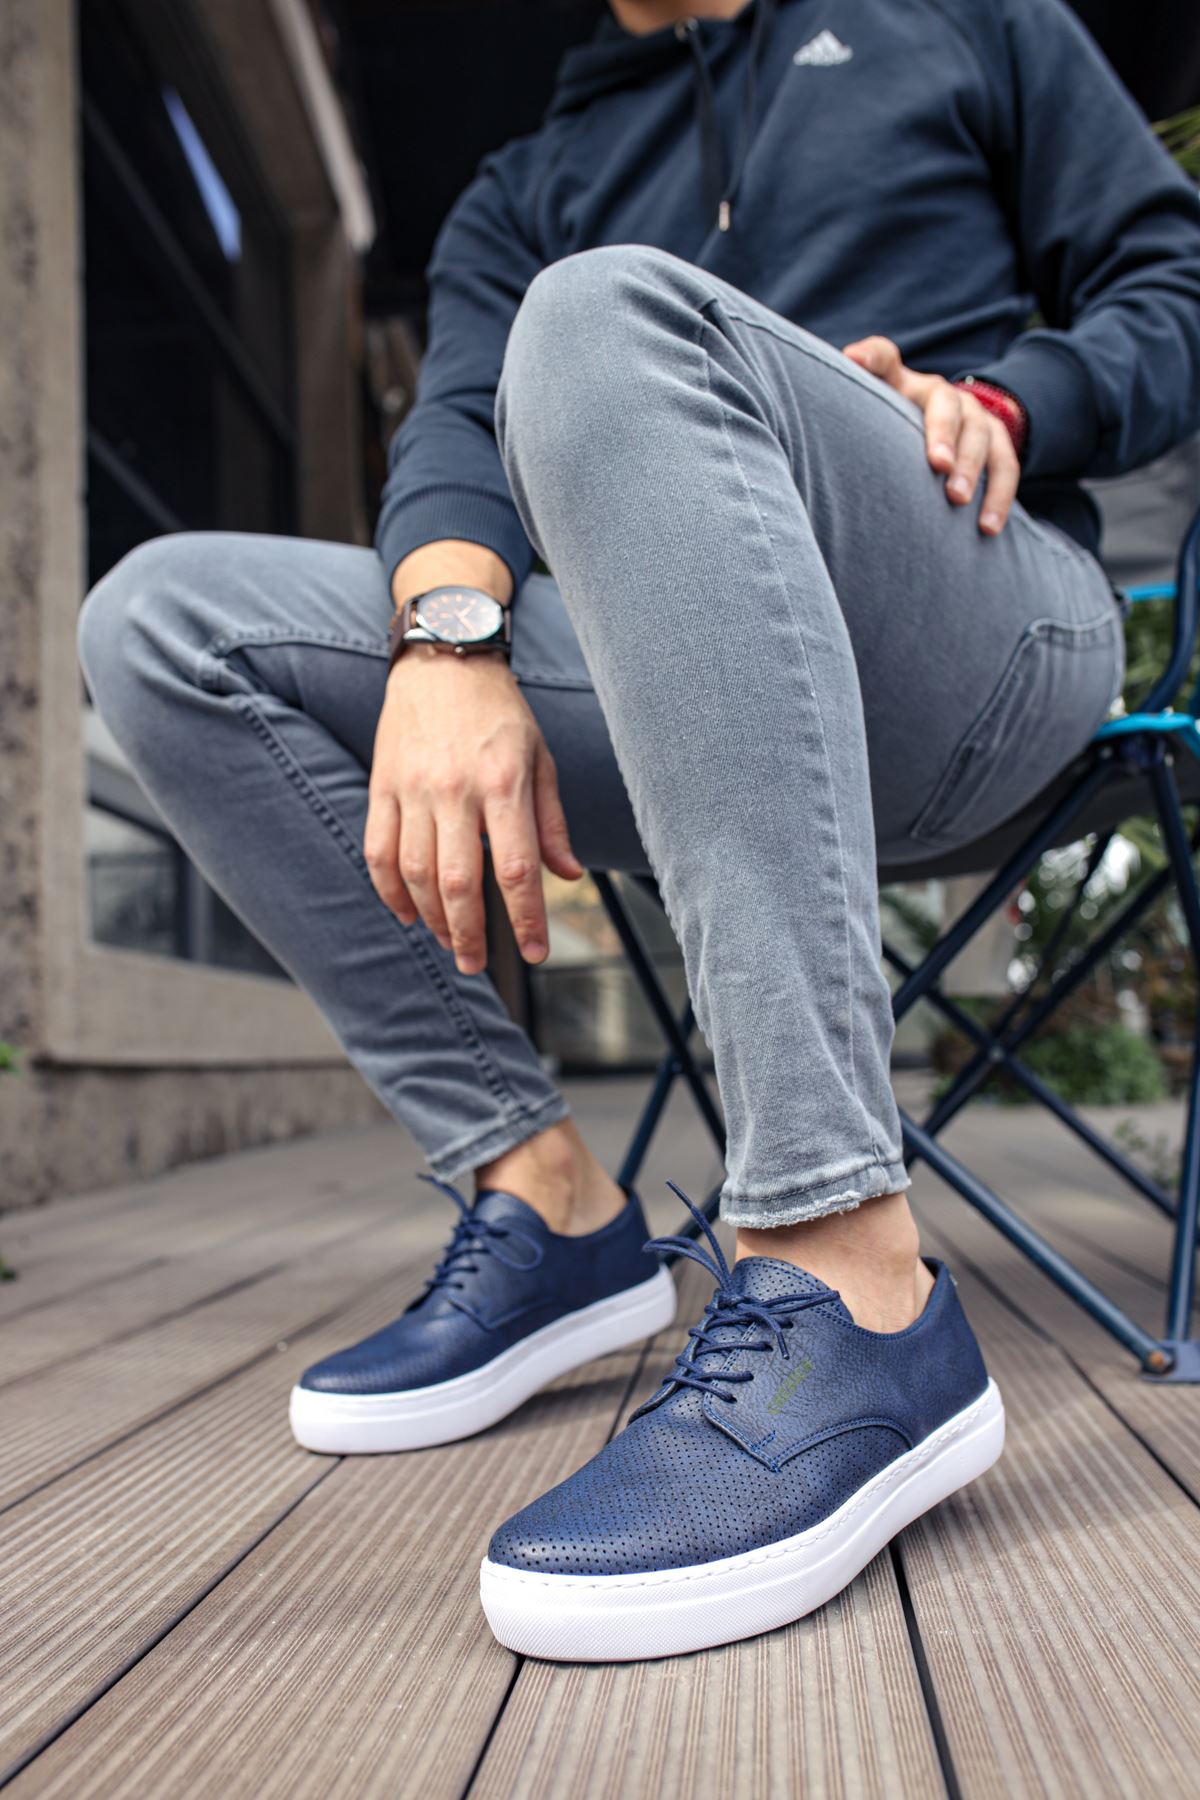 CH061 Men's Orthopedics Navy Blue-White Sole Lace-up Casual Sneaker Shoes - STREETMODE ™